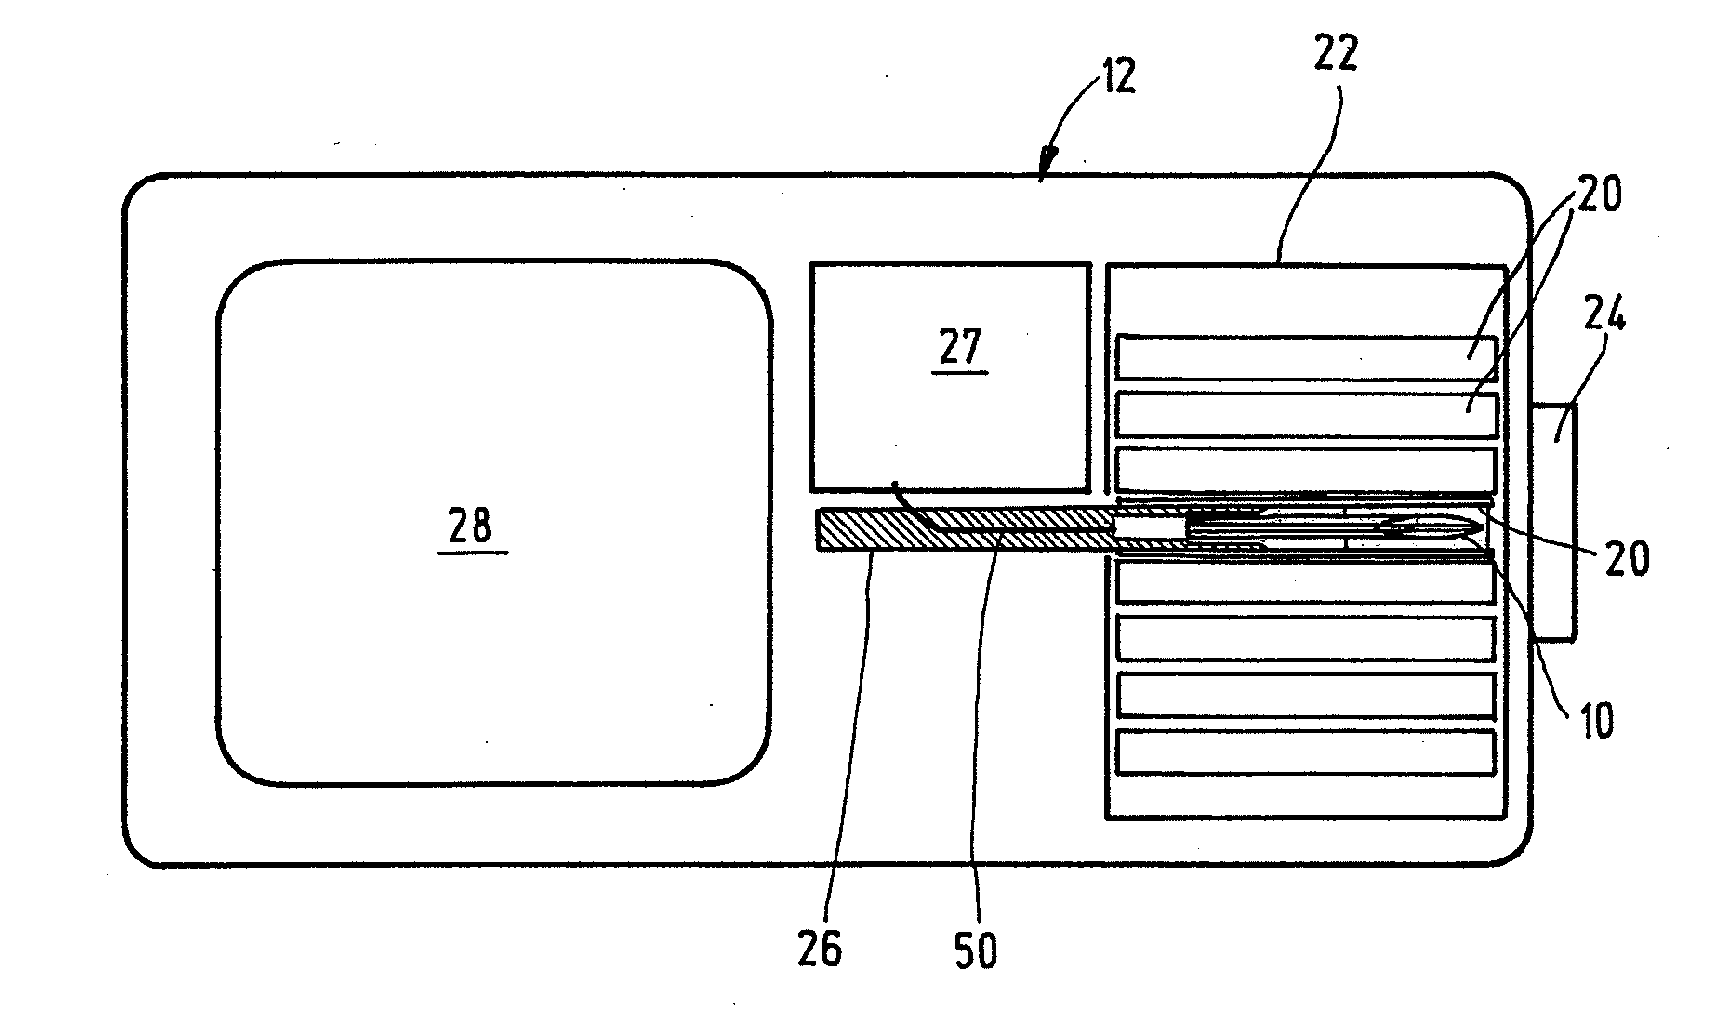 Test element and test system for examining a body fluid